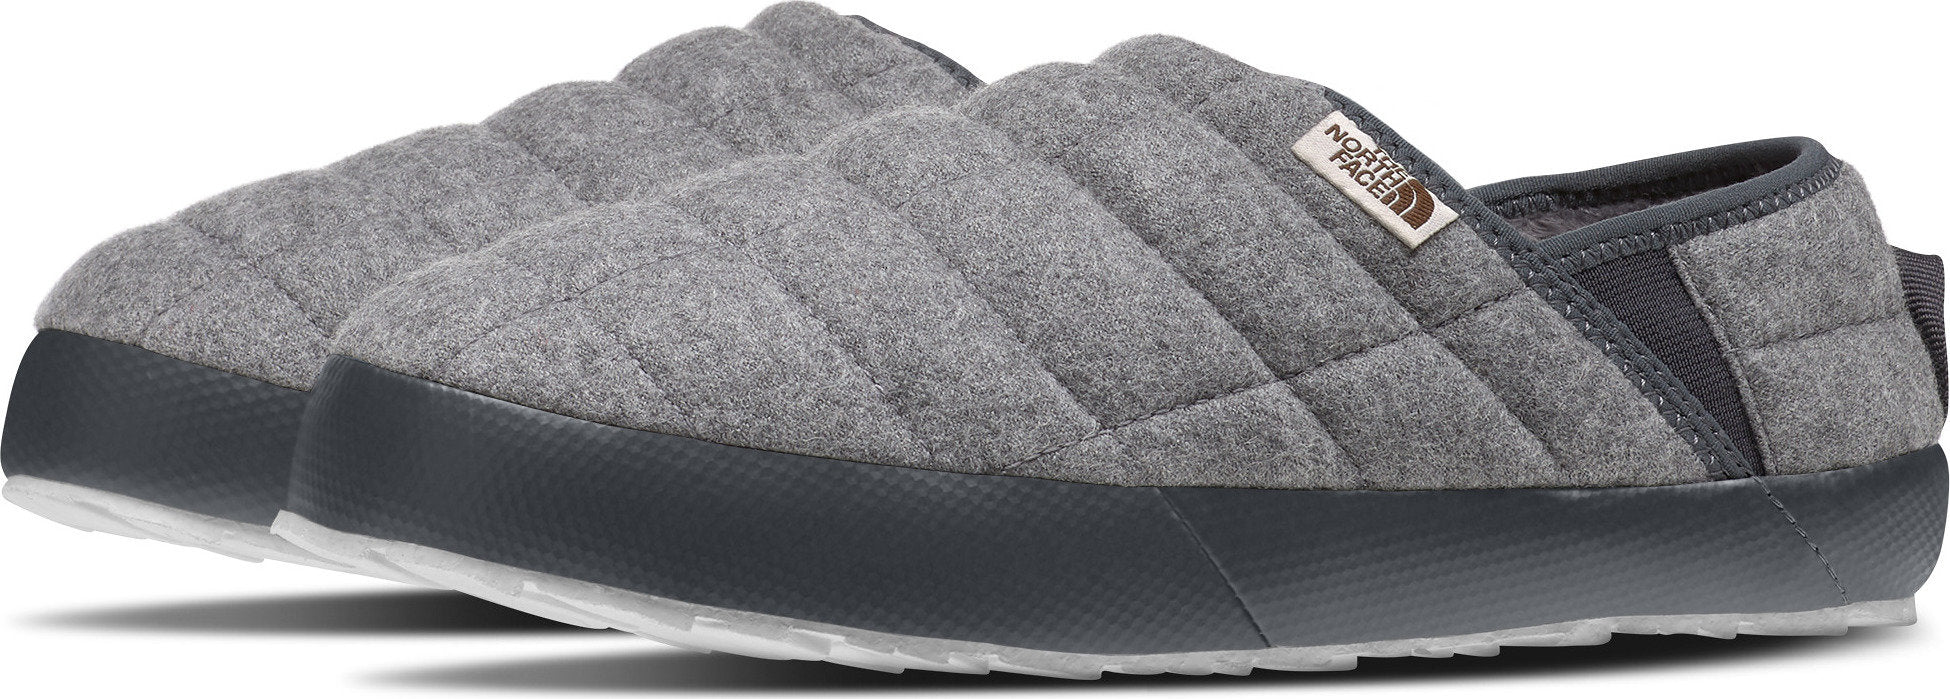 women's thermoball slippers